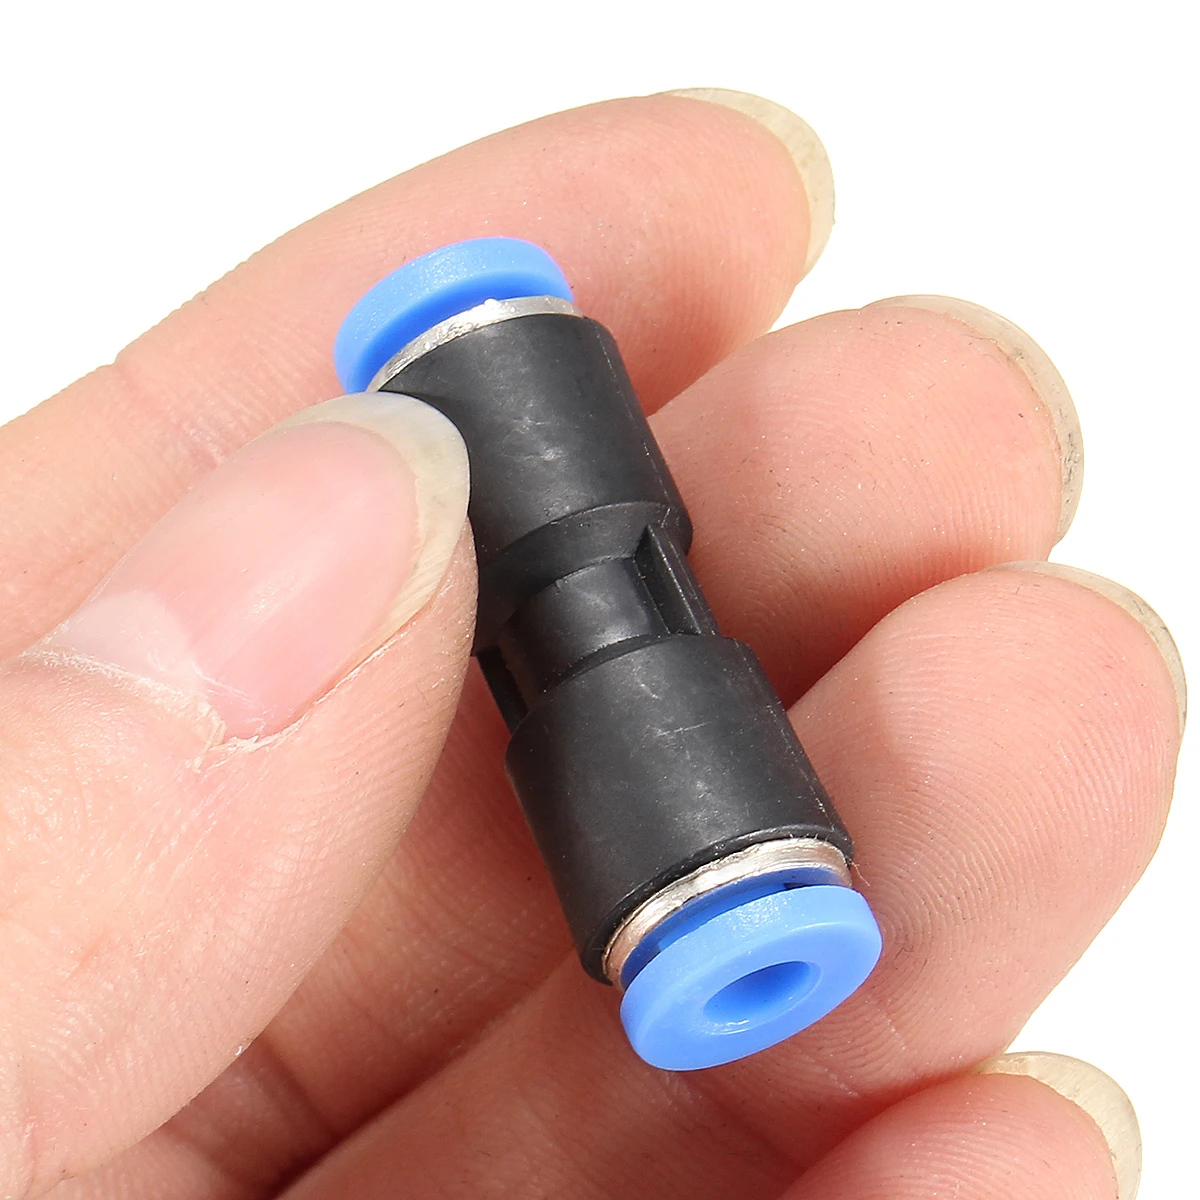 10Pcs Air Pneumatic OD 1/4 Inch Straight Union Push to Connect Fitting 4mm-12mm For Air Water Hose Plastic Pneumatic Parts,4mm